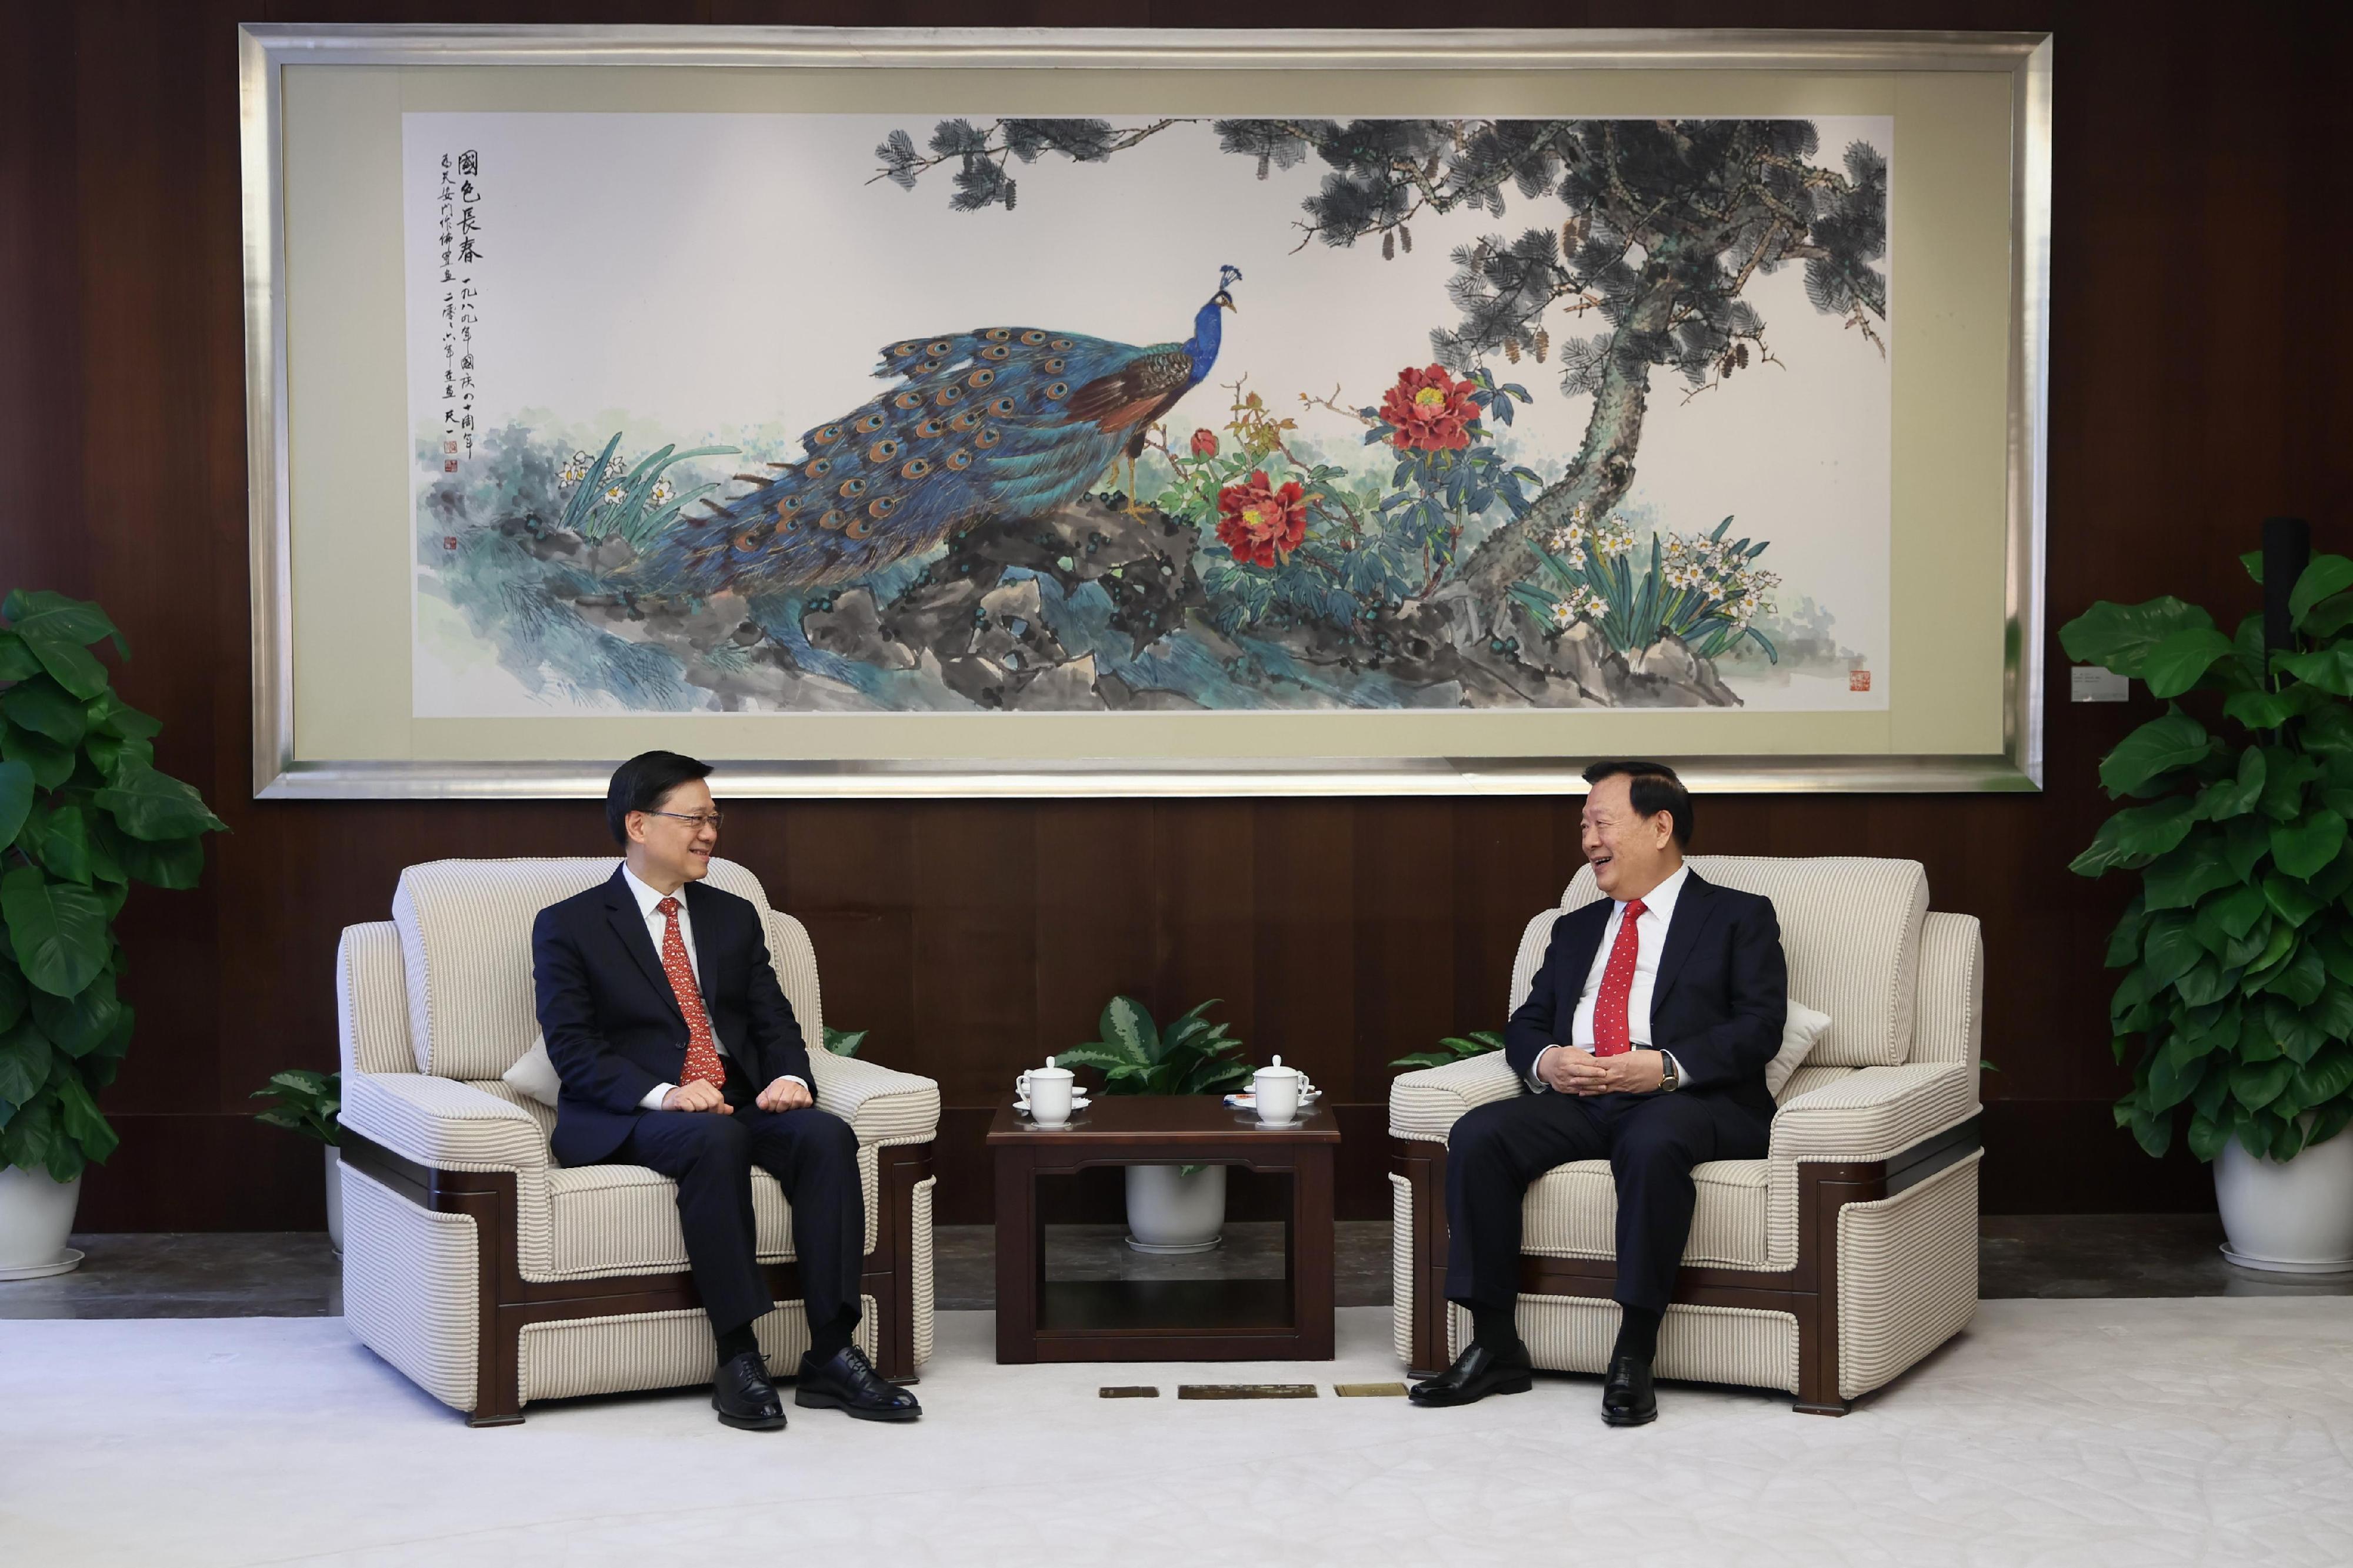 The Director of the Hong Kong and Macao Work Office of the Communist Party of China Central Committee and the Hong Kong and Macao Affairs Office of the State Council, Mr Xia Baolong (right), meets the Chief Executive, Mr John Lee (left), in Shenzhen this morning (March 21).